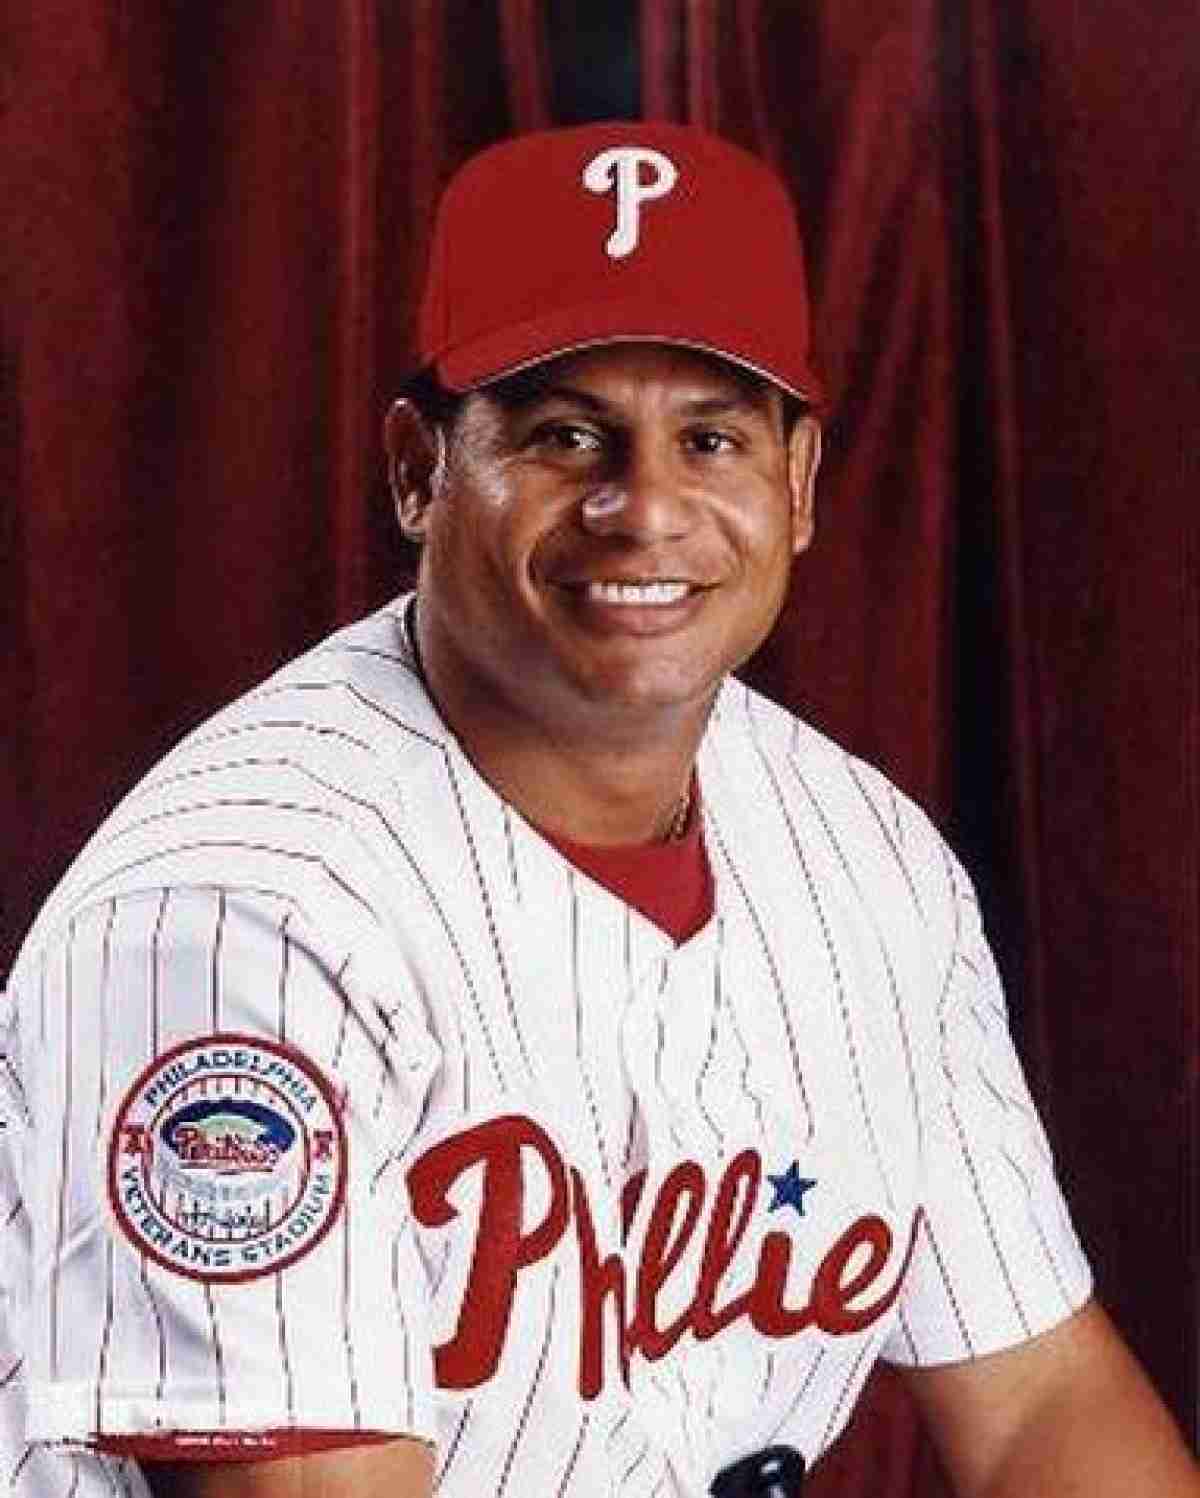 Not in Hall of Fame - 74. Bobby Abreu